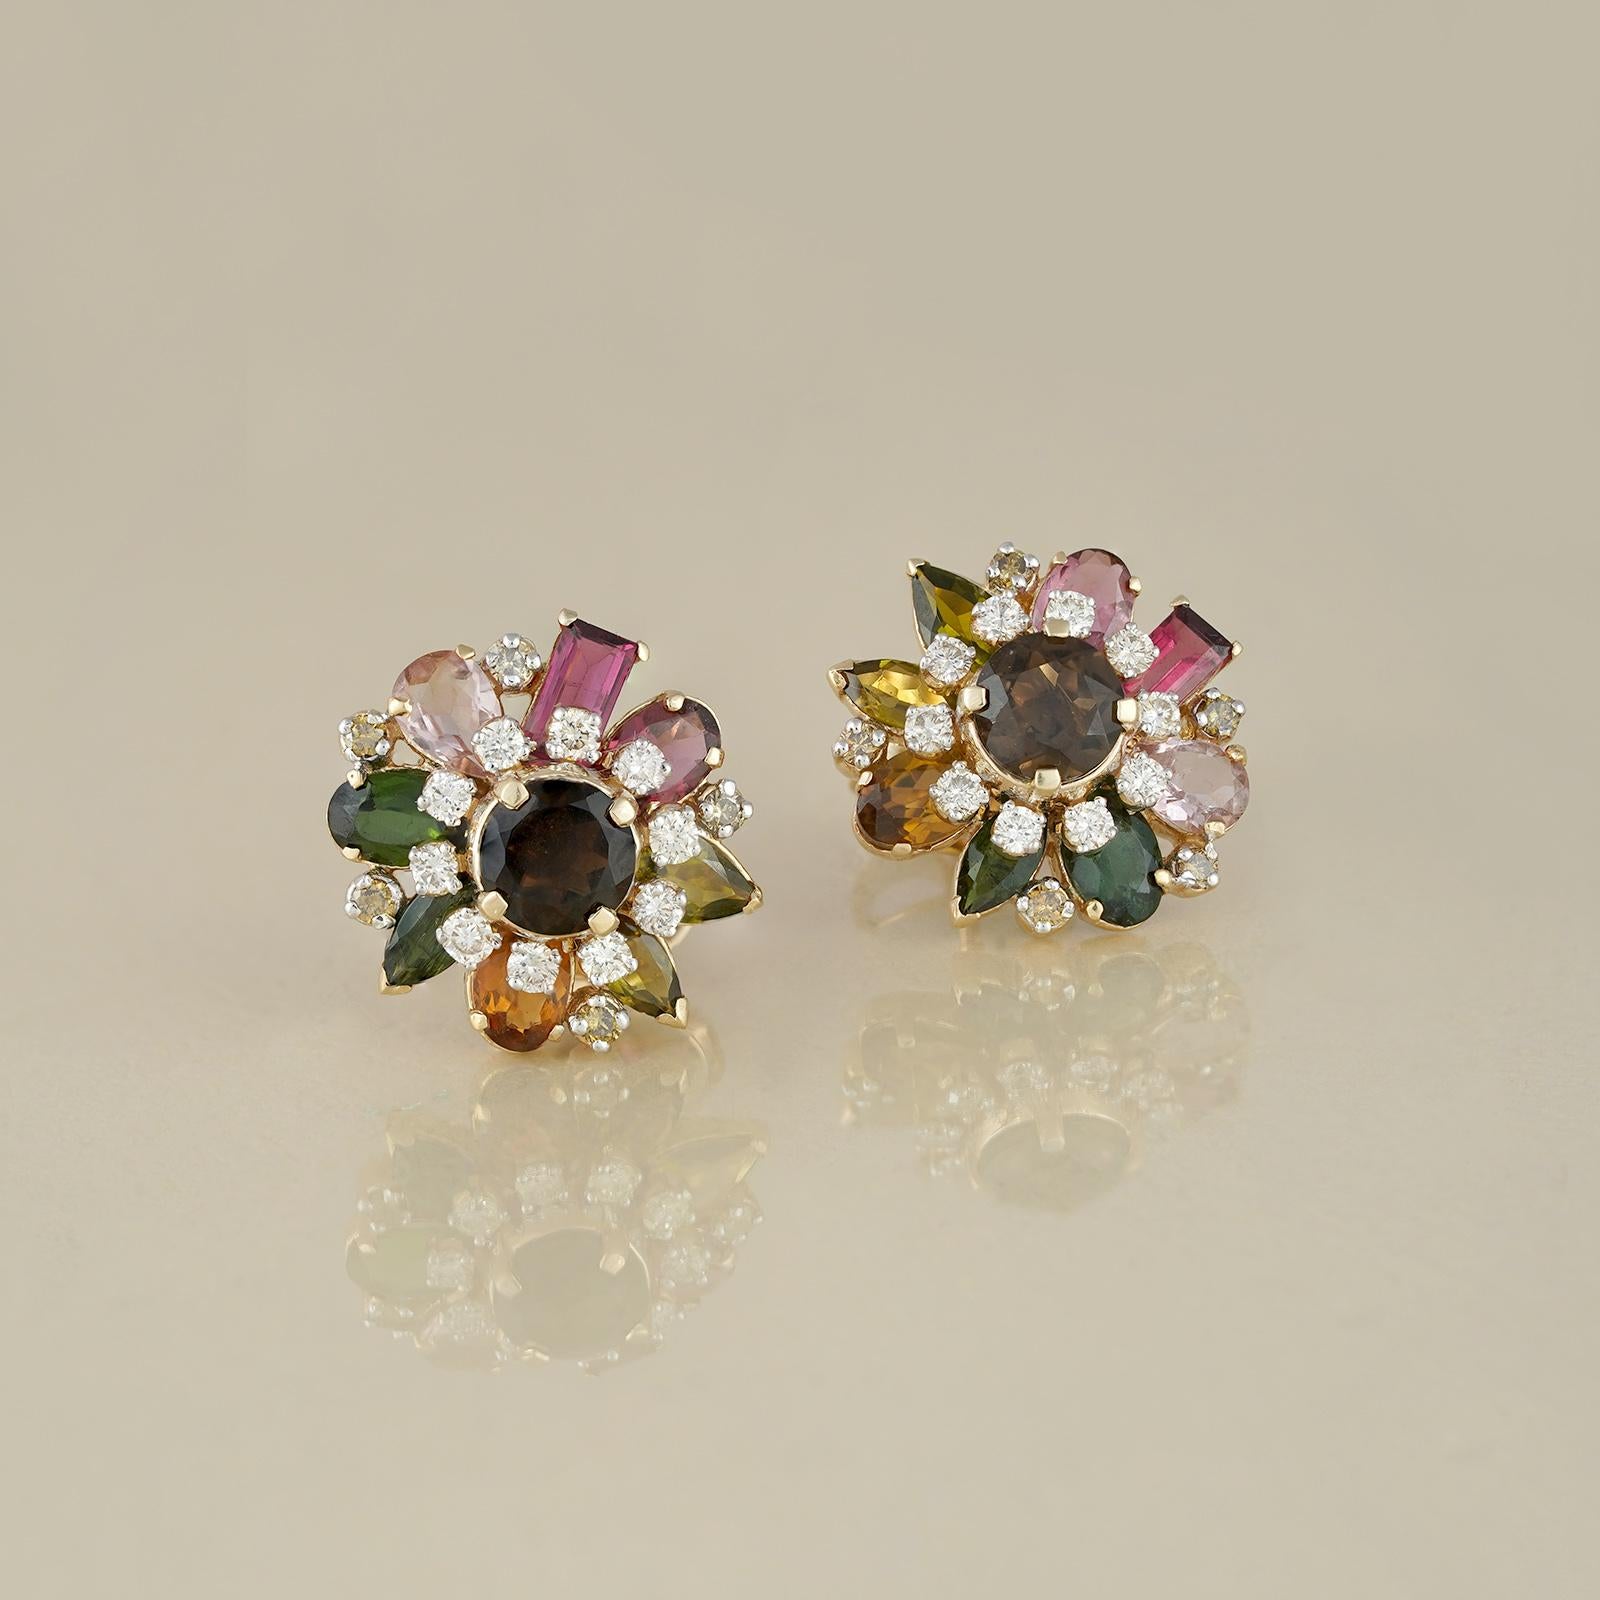 Moi Autumn Gold Diamond and Colorful Gemstone Stud Earrings  In New Condition For Sale In Lawrenceville, GA